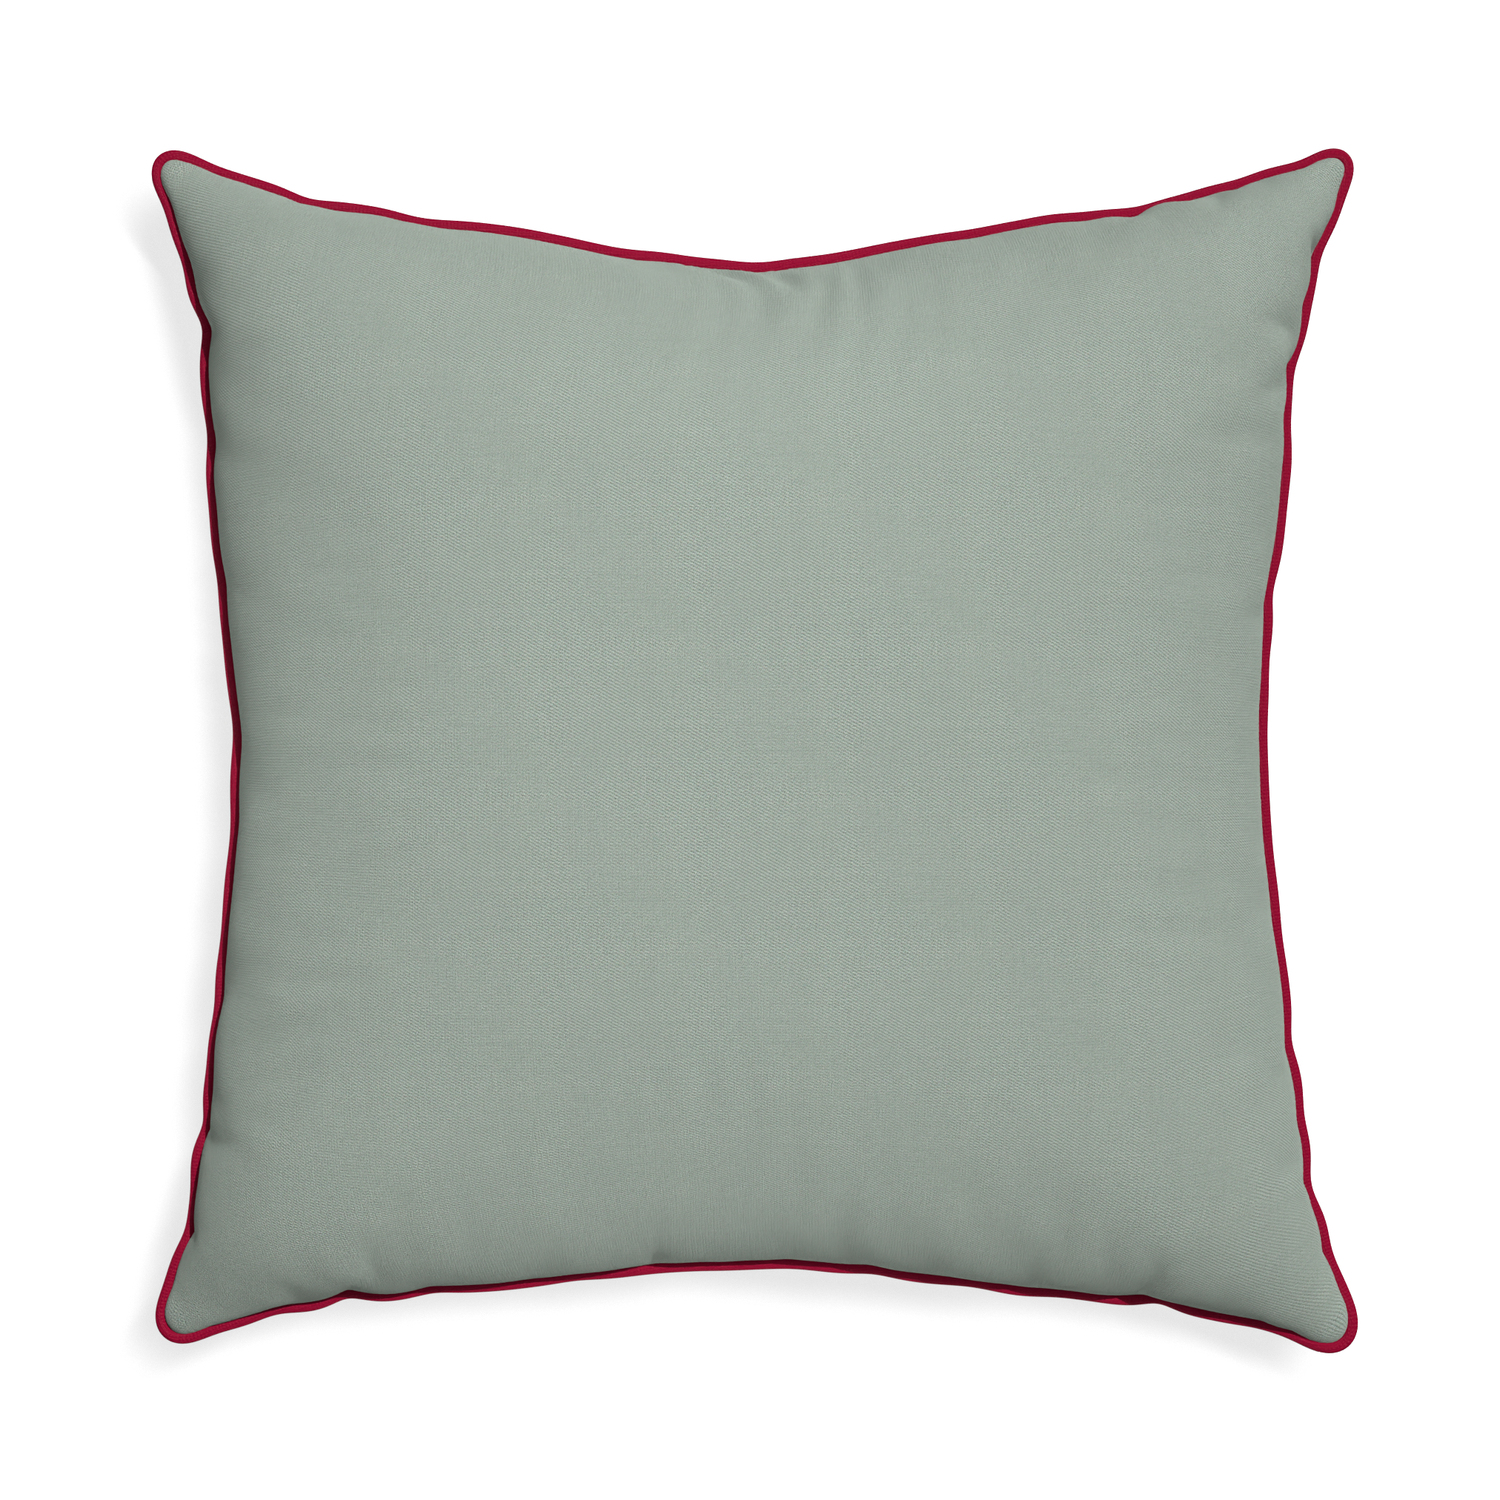 Euro-sham sage custom sage green cottonpillow with raspberry piping on white background